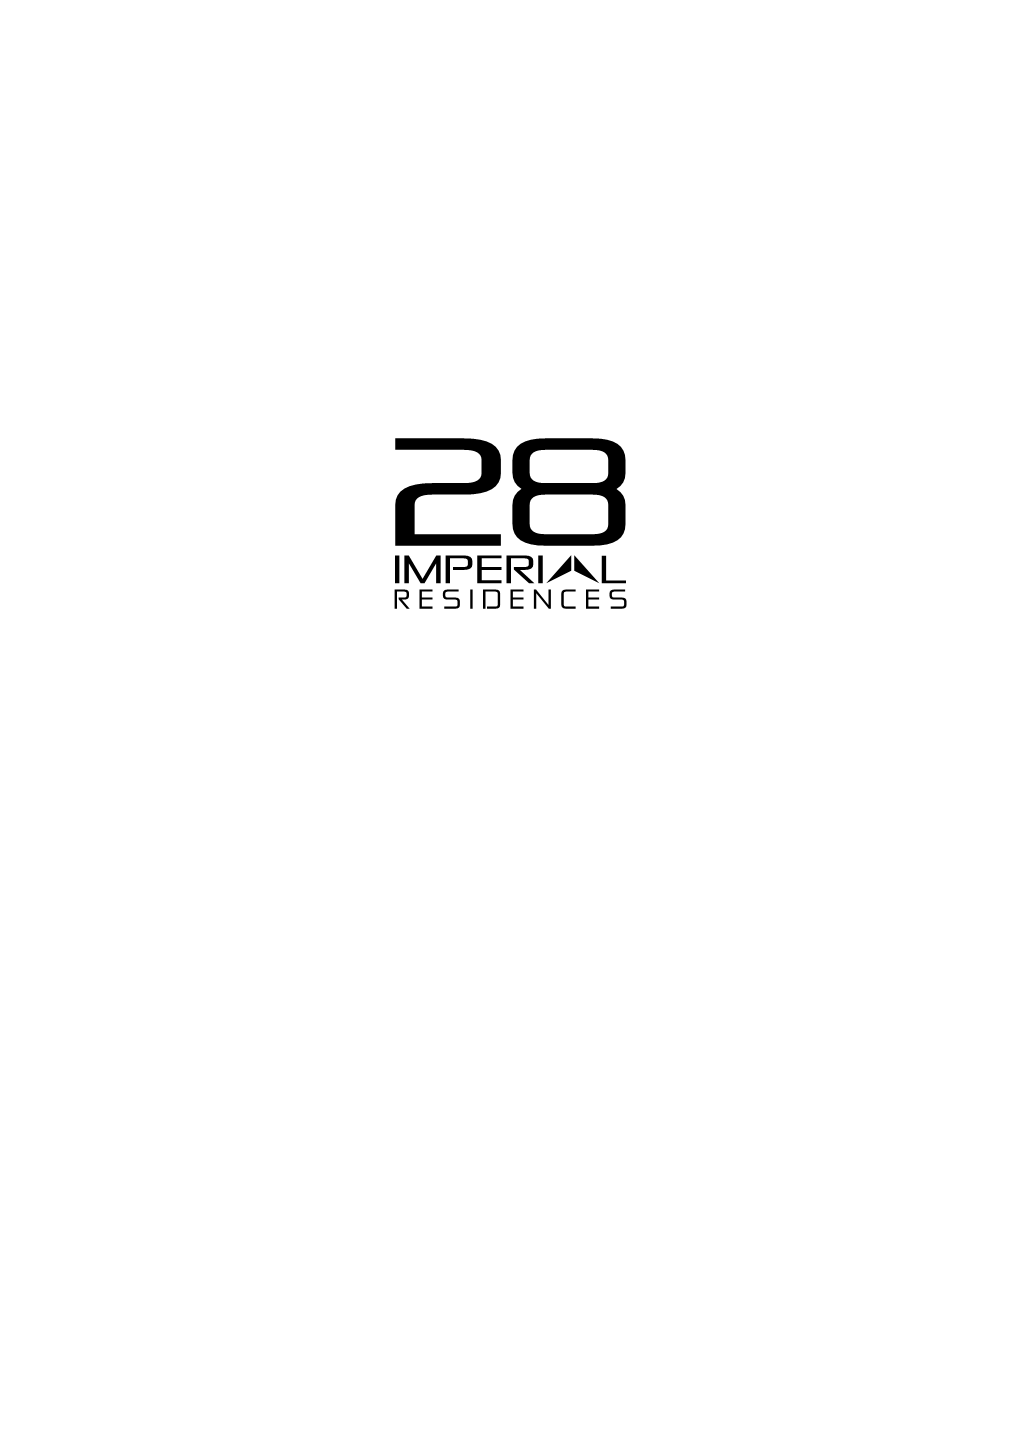 Download 28 Imperial Residences E-Brochure